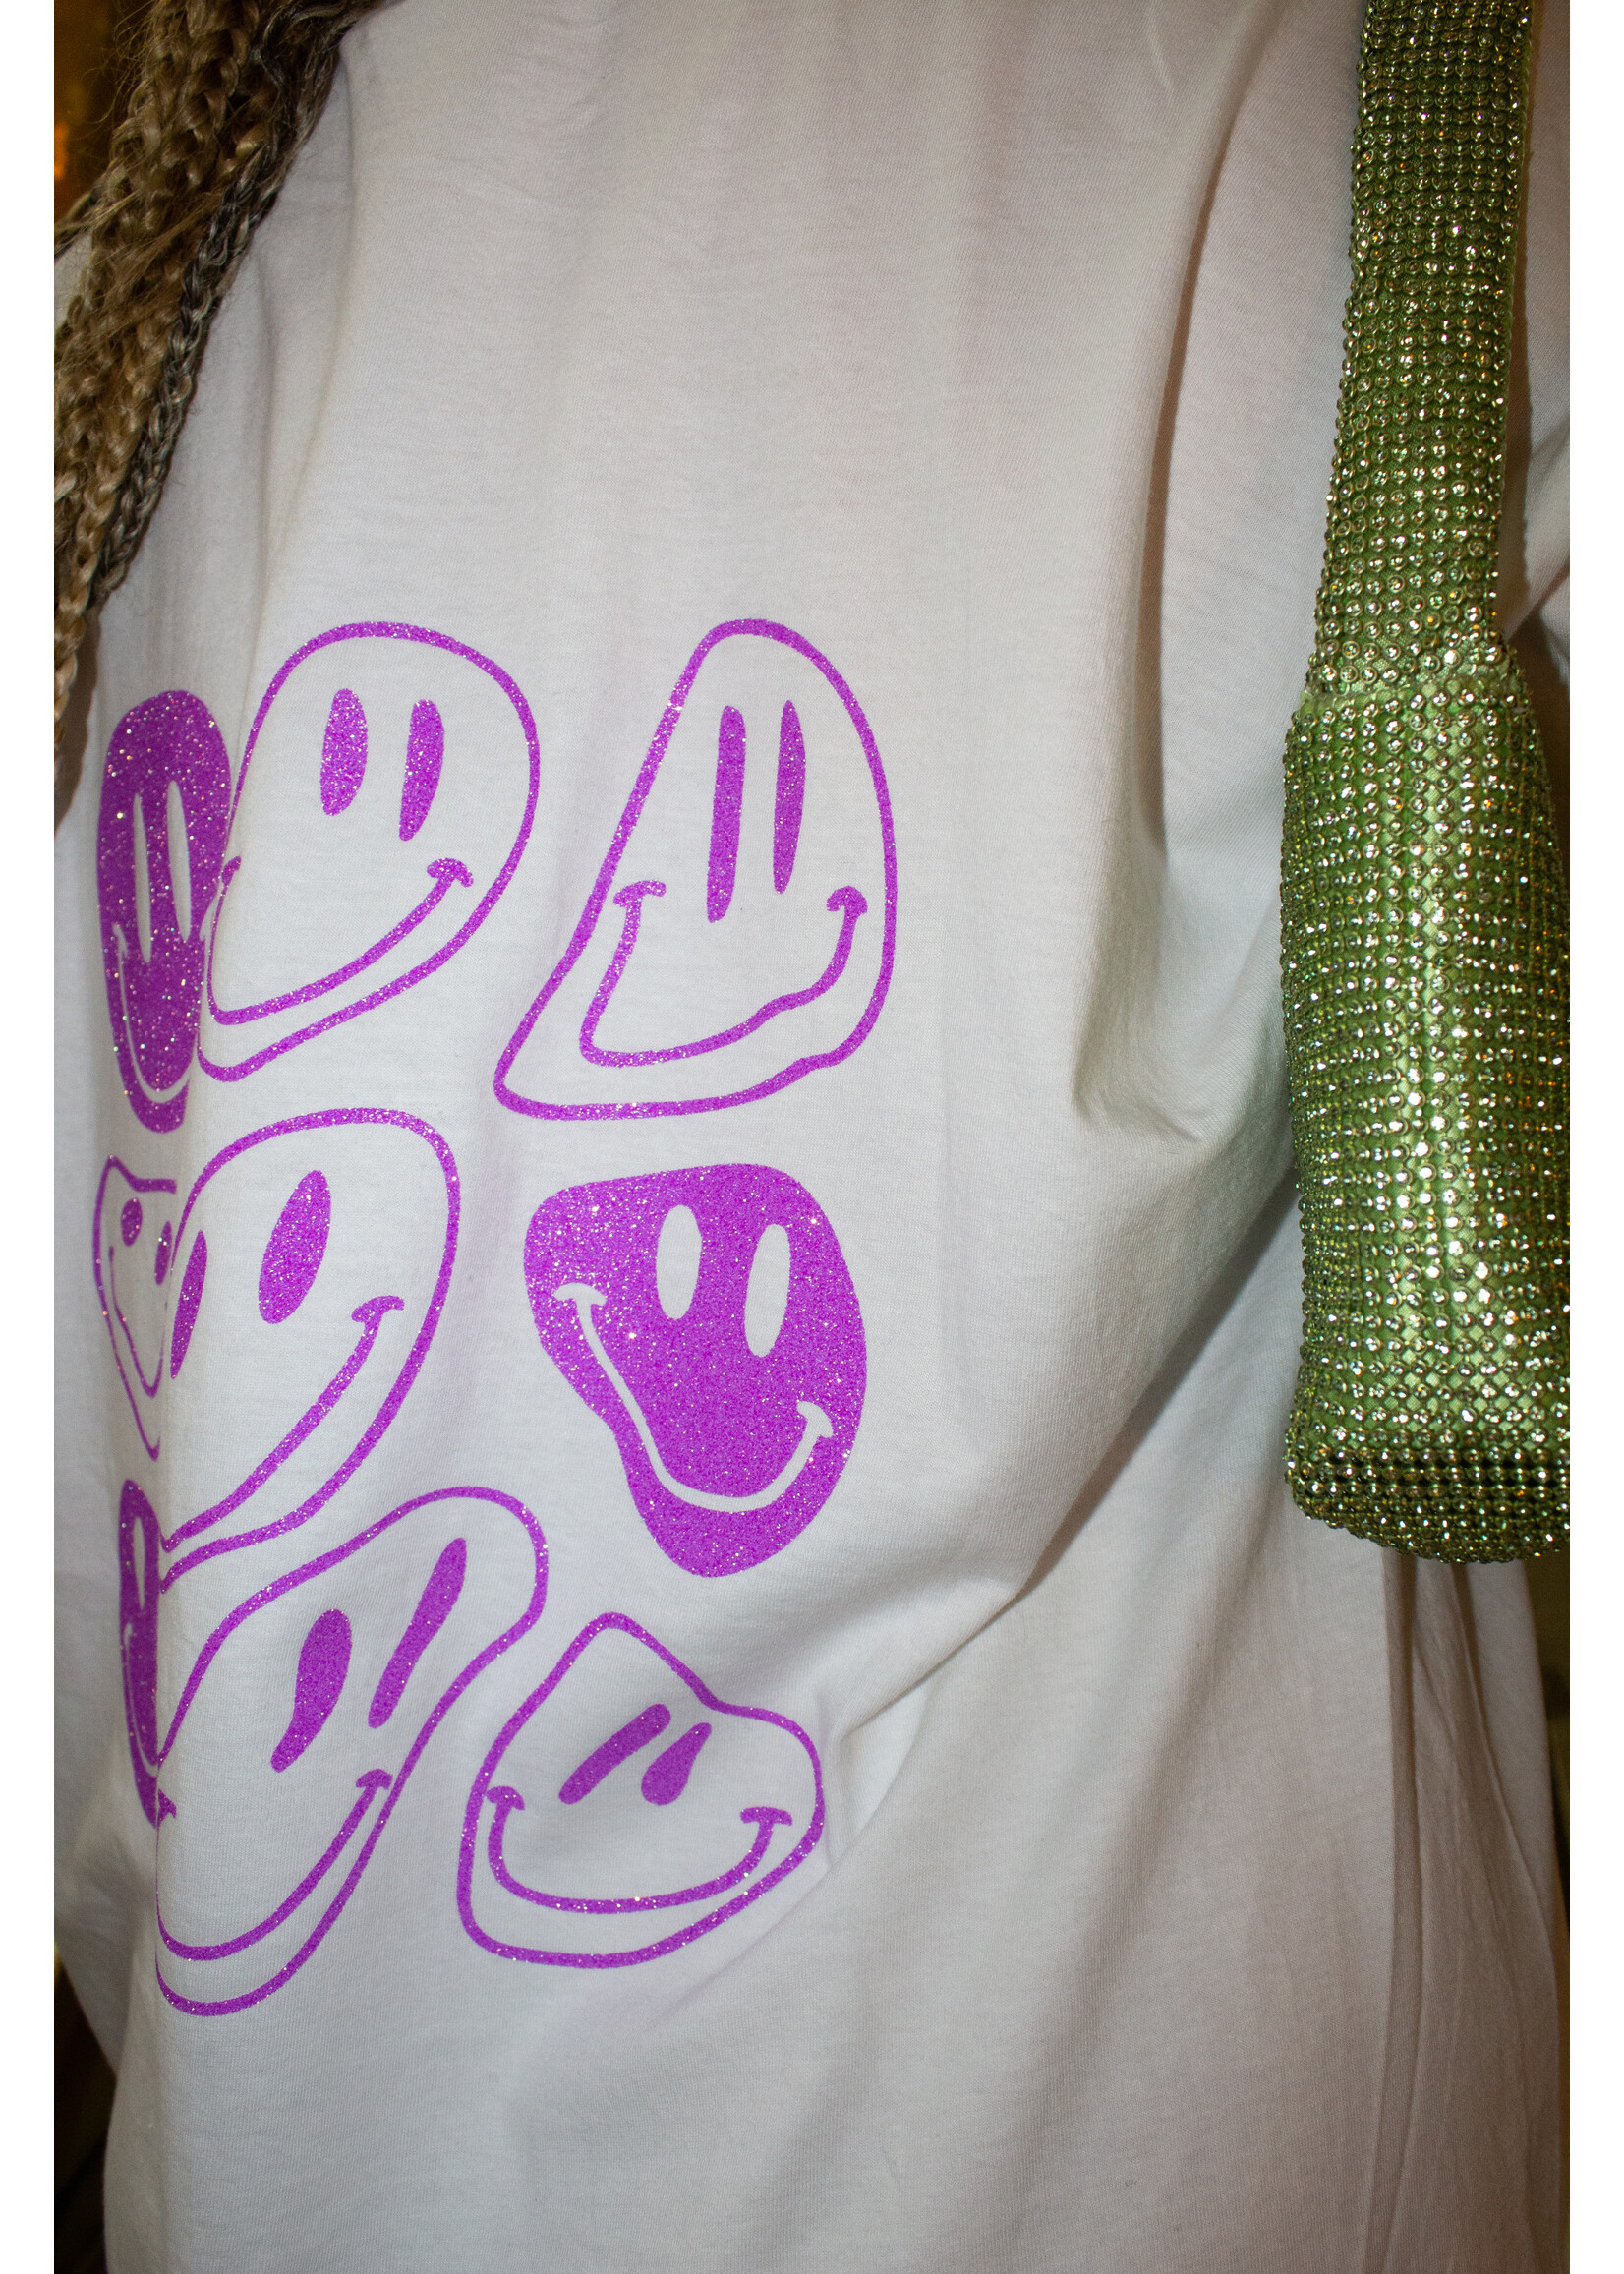 YOU ARE SPECIAL ''Purple Glitter Smiley'' White T-shirt Dress